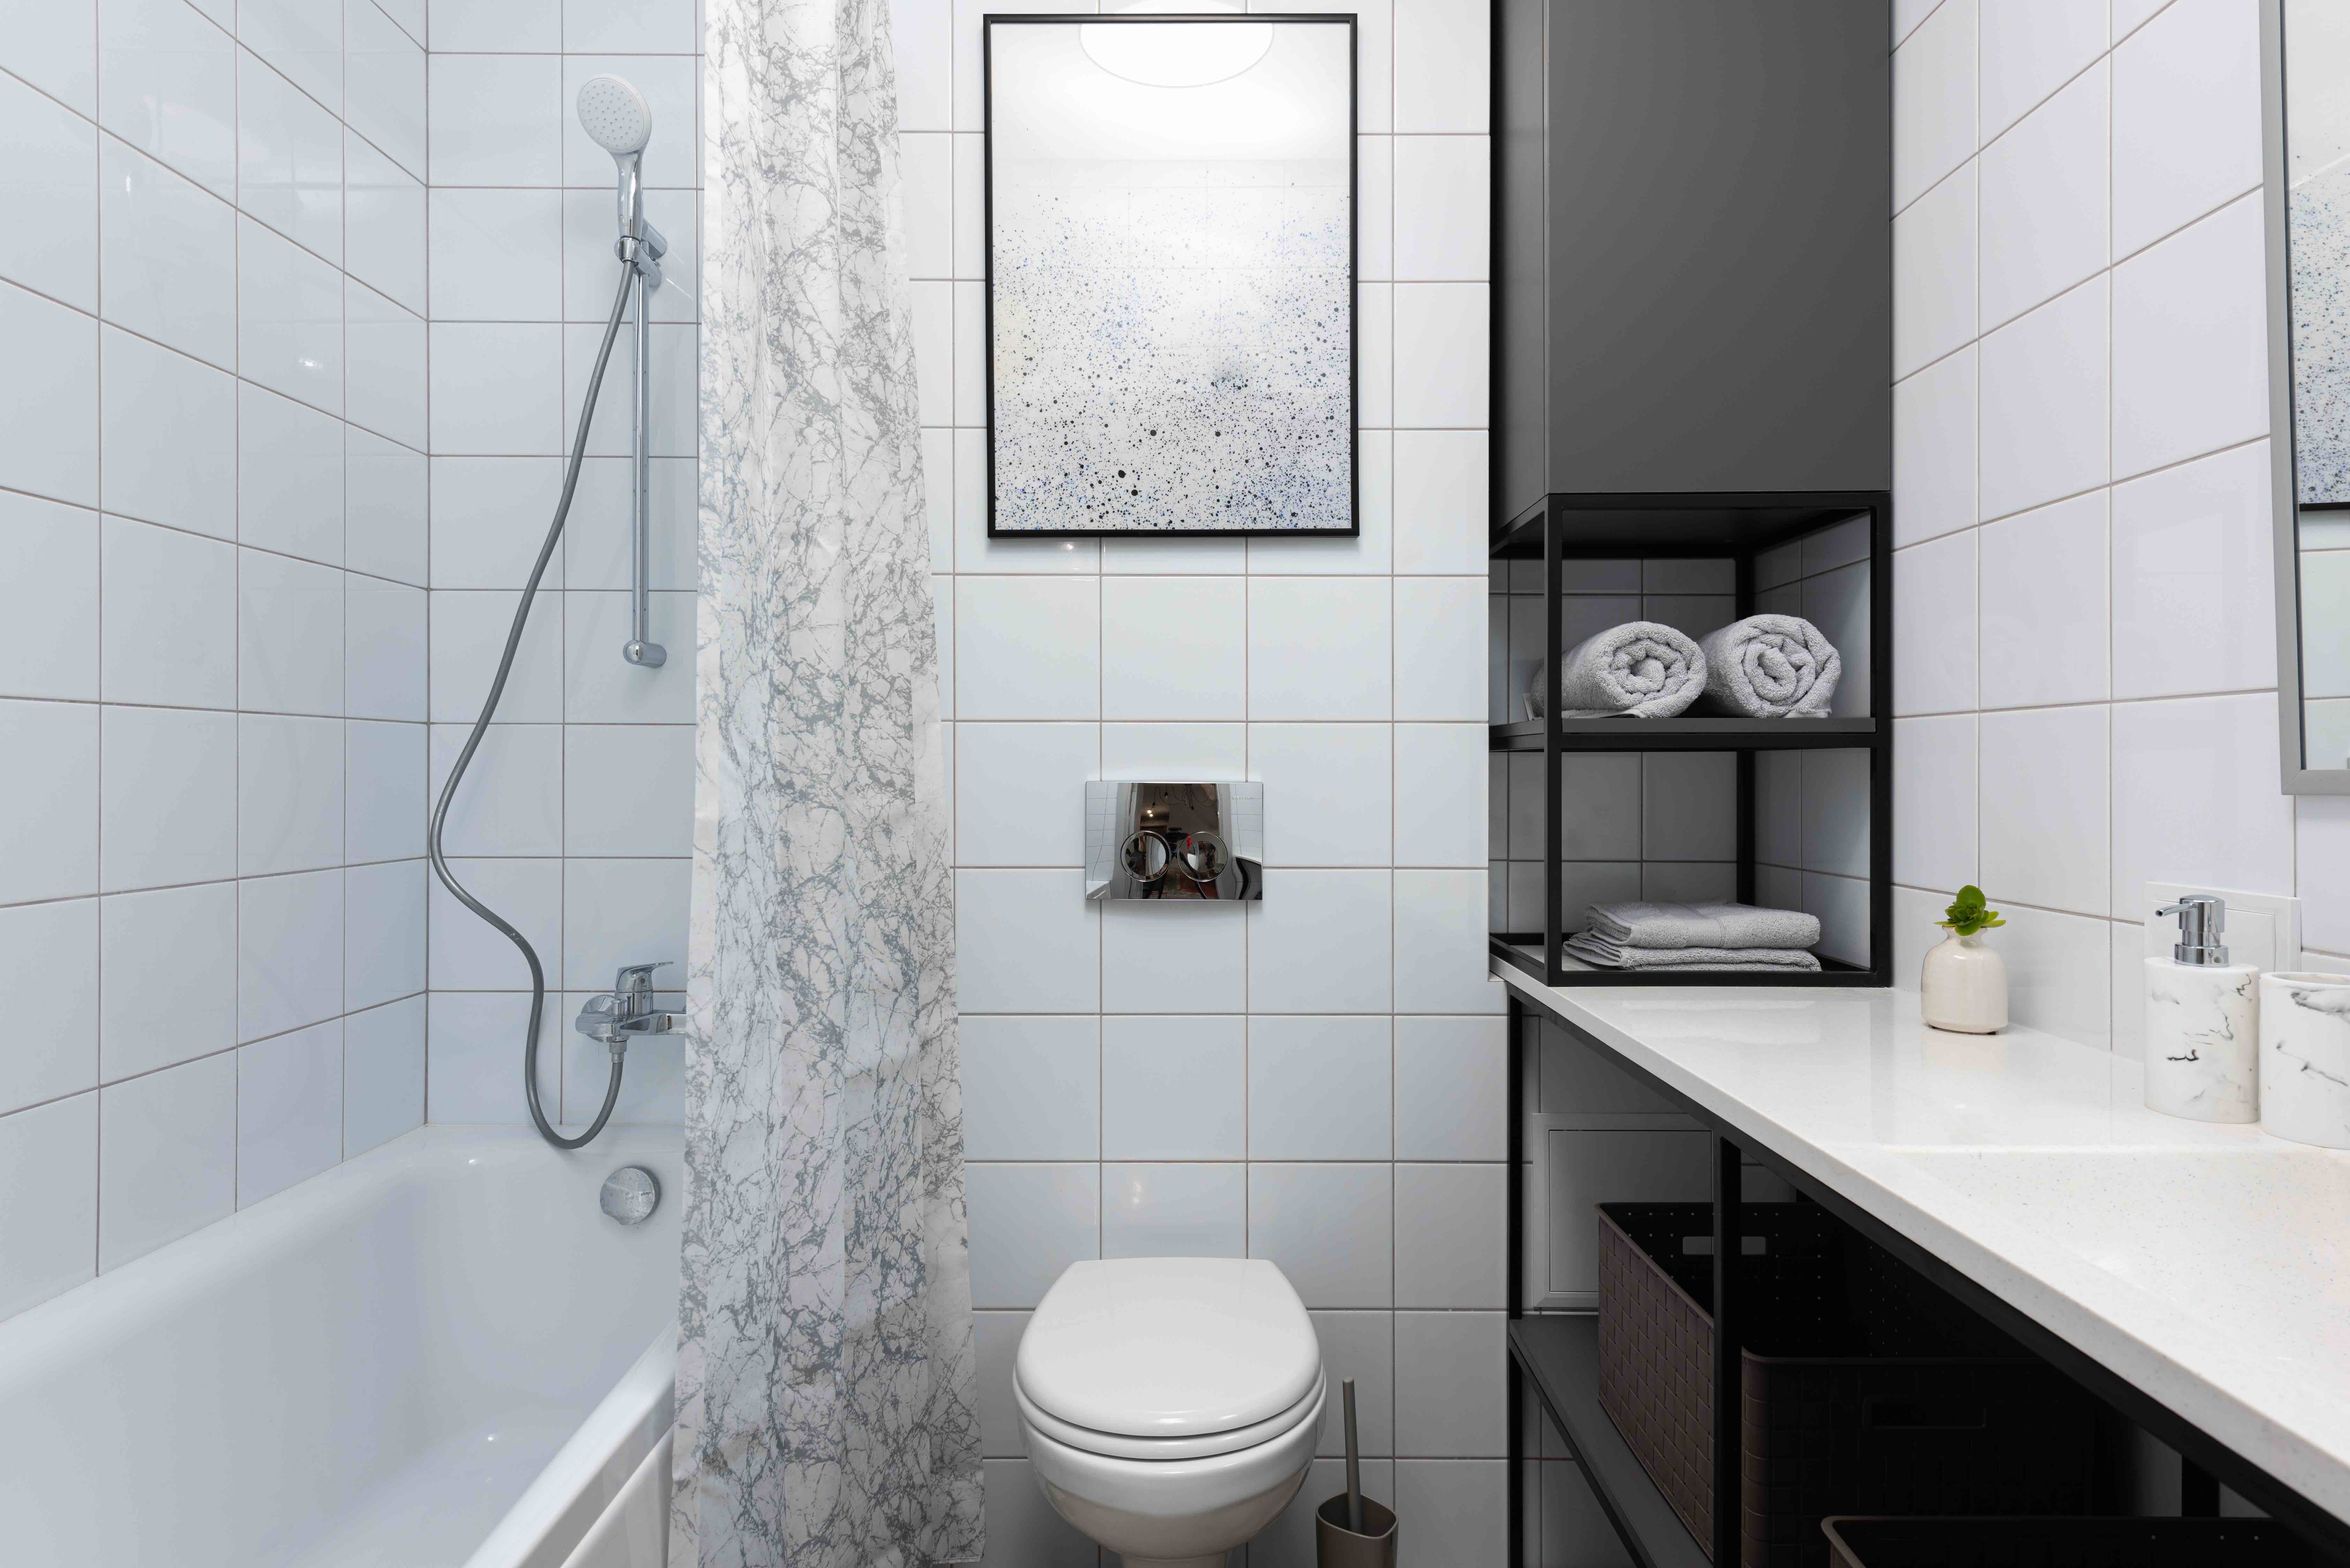 Condo Bathroom Remodel Ideas for Better Style and Functionality ... - Pexels Max Vakhtbovych 6487944